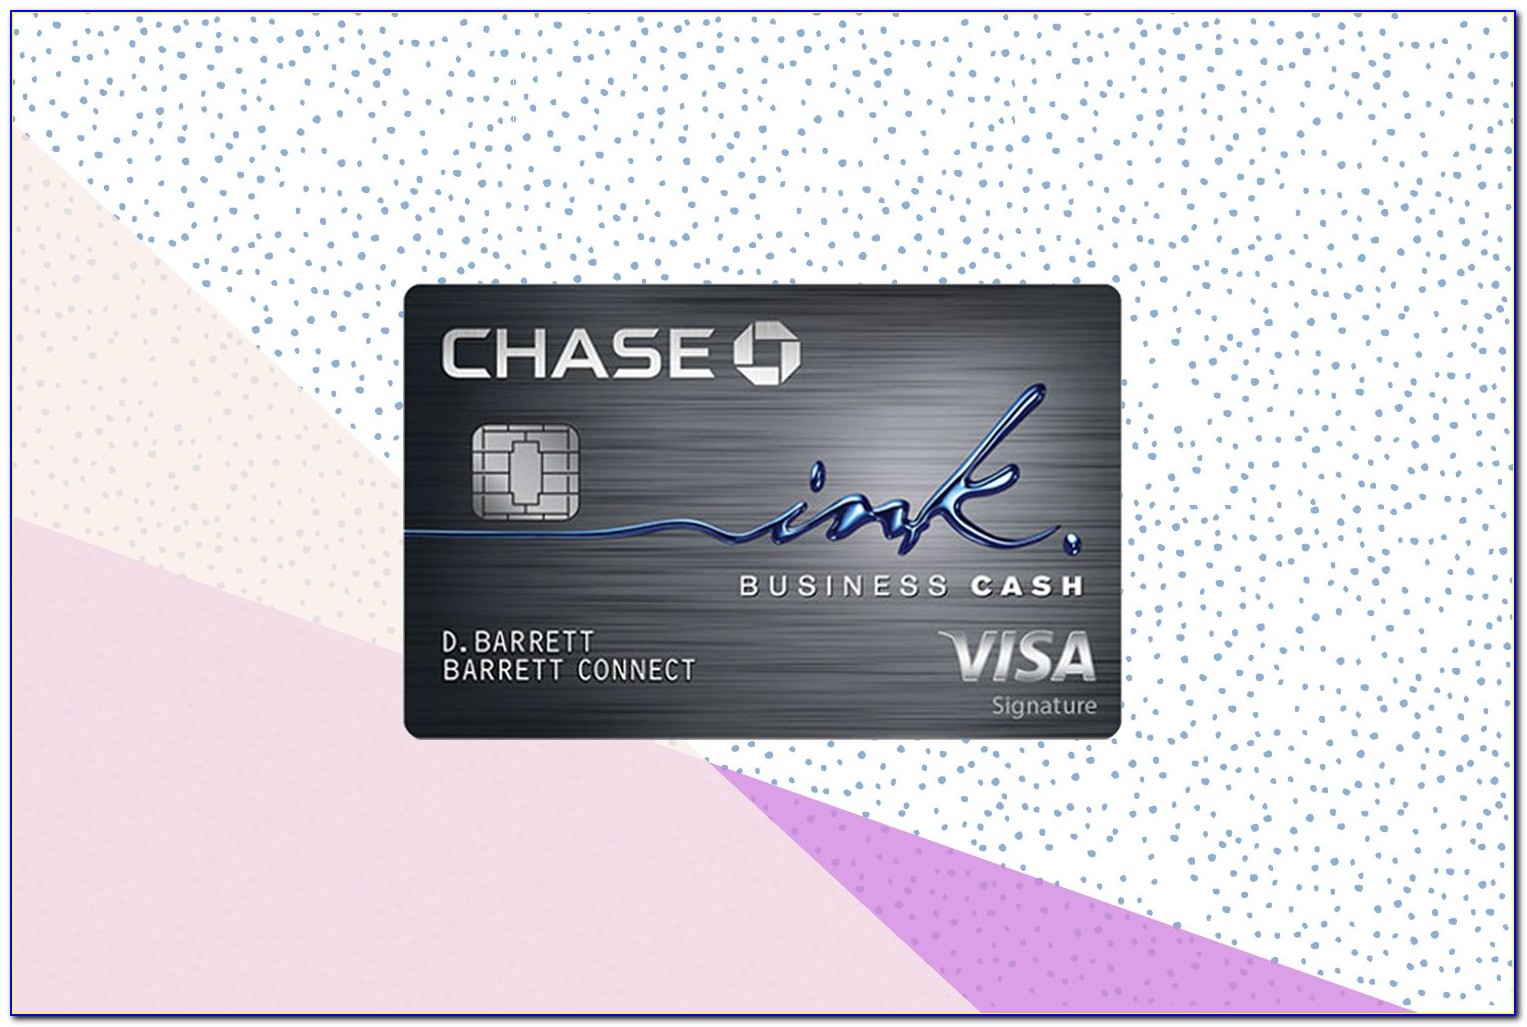 Chase Business Cash Foreign Transaction Fee